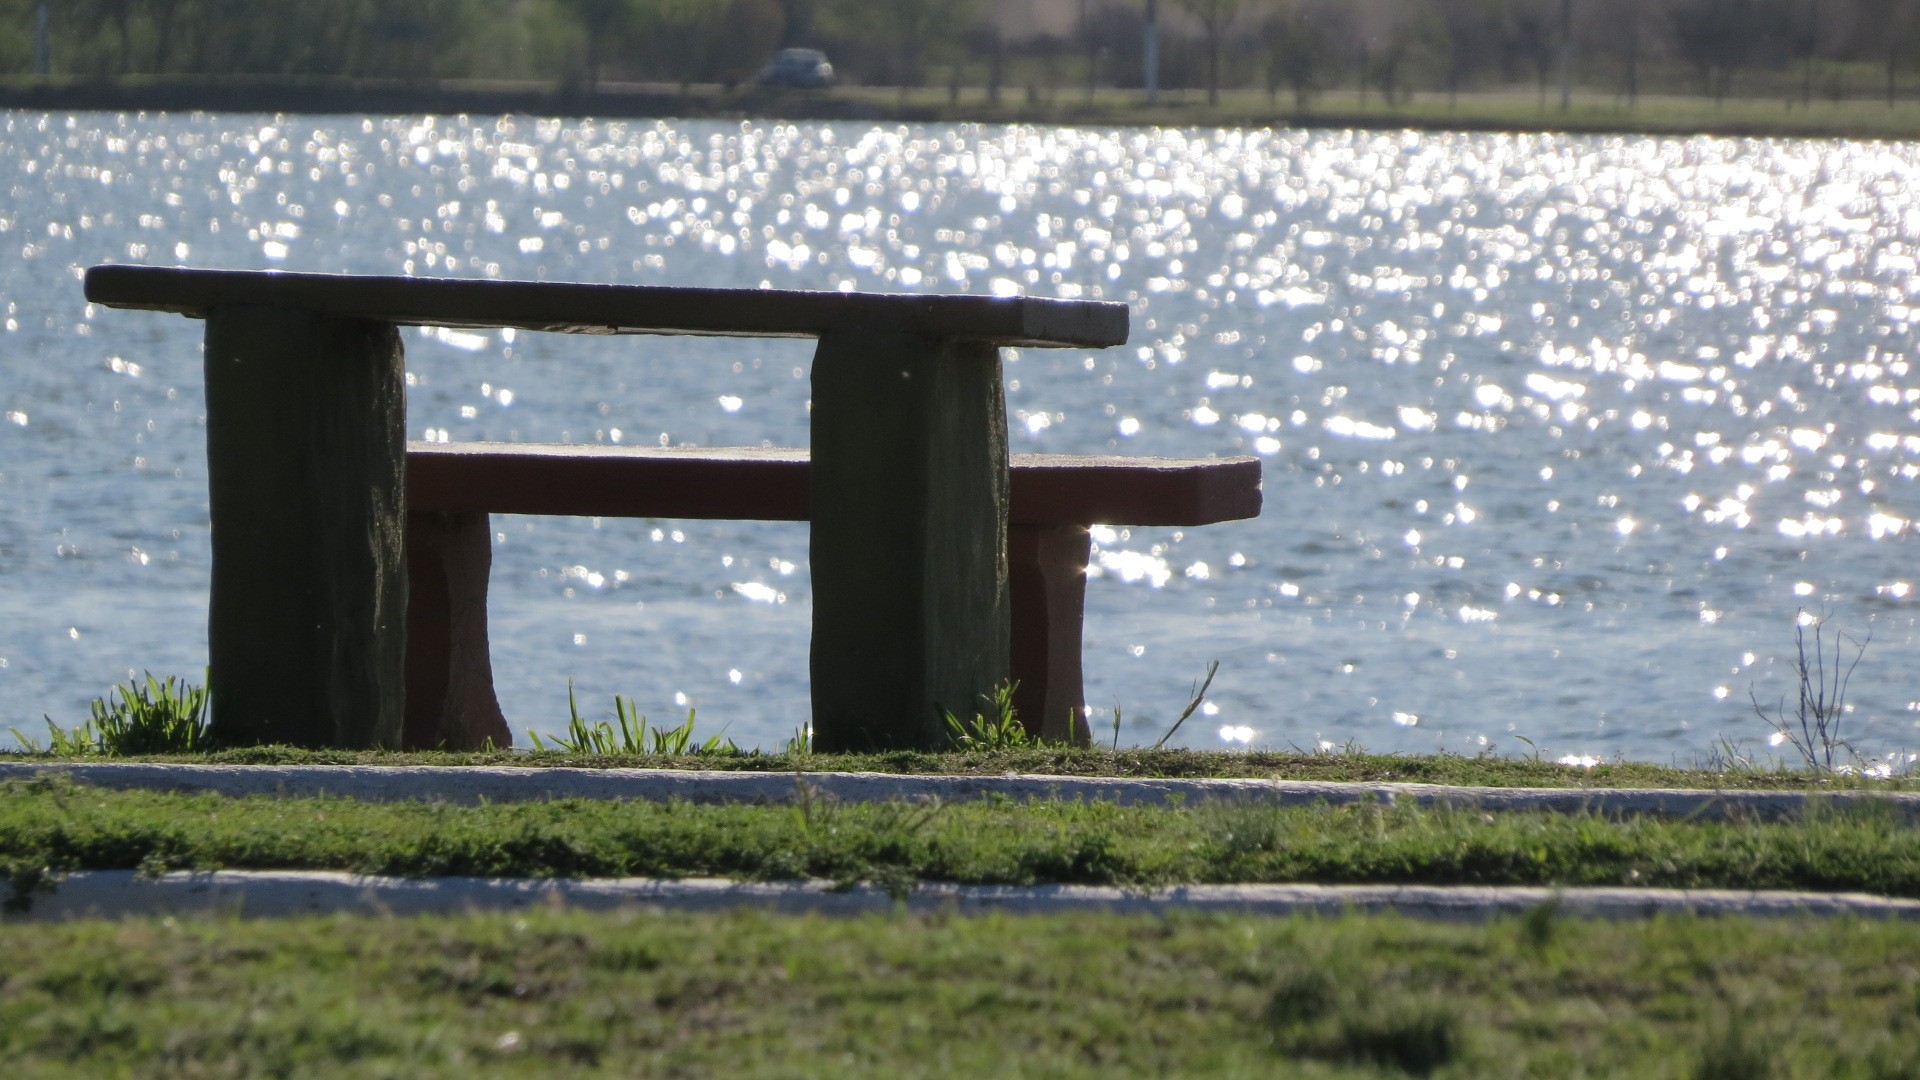 General 1920x1080 bench water outdoors